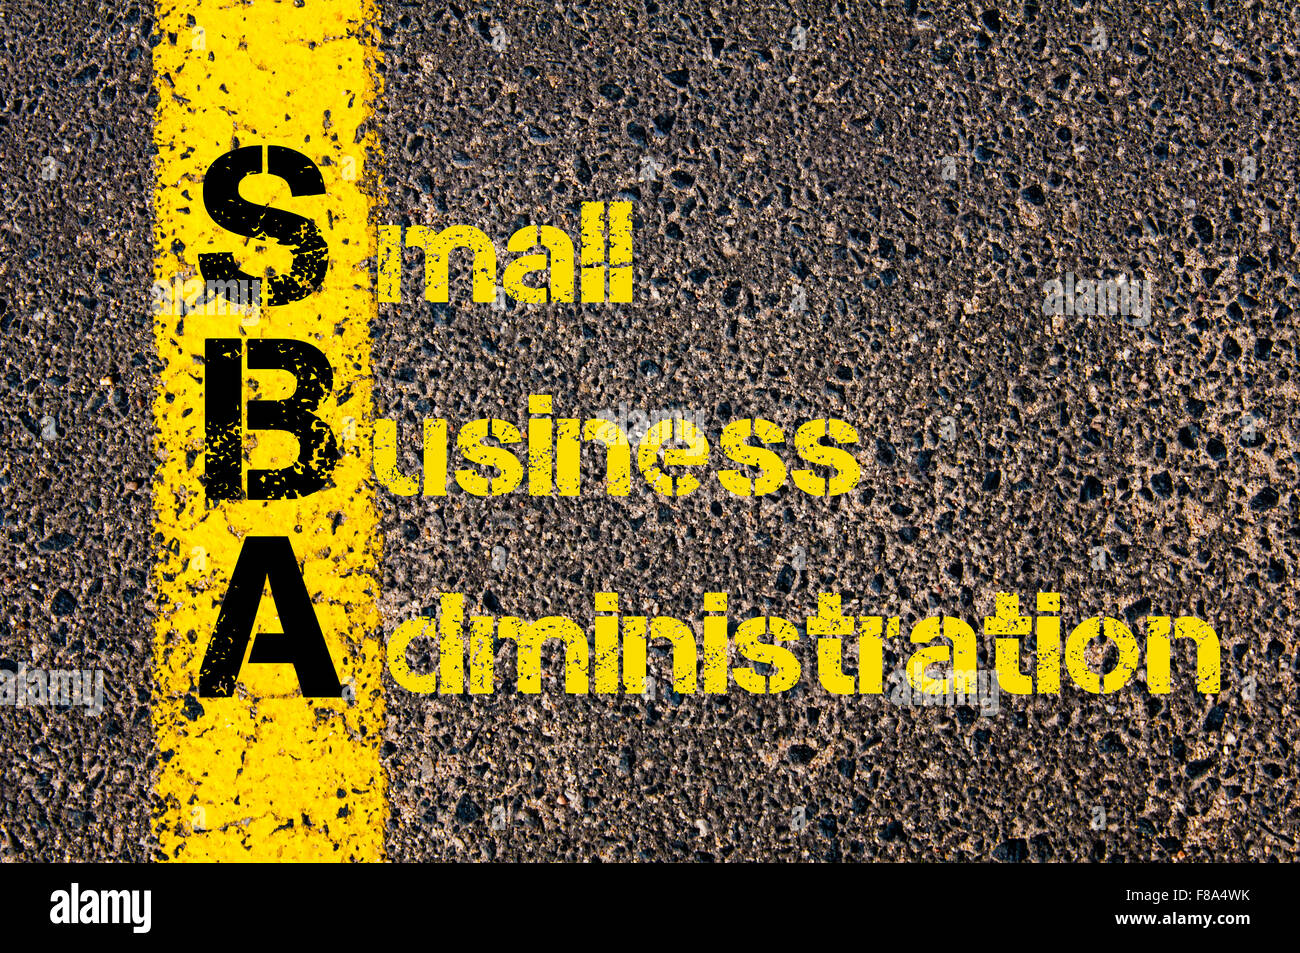 Concept image of Accounting Business Acronym SBA Small Business Administration written over road marking yellow paint line. Stock Photo